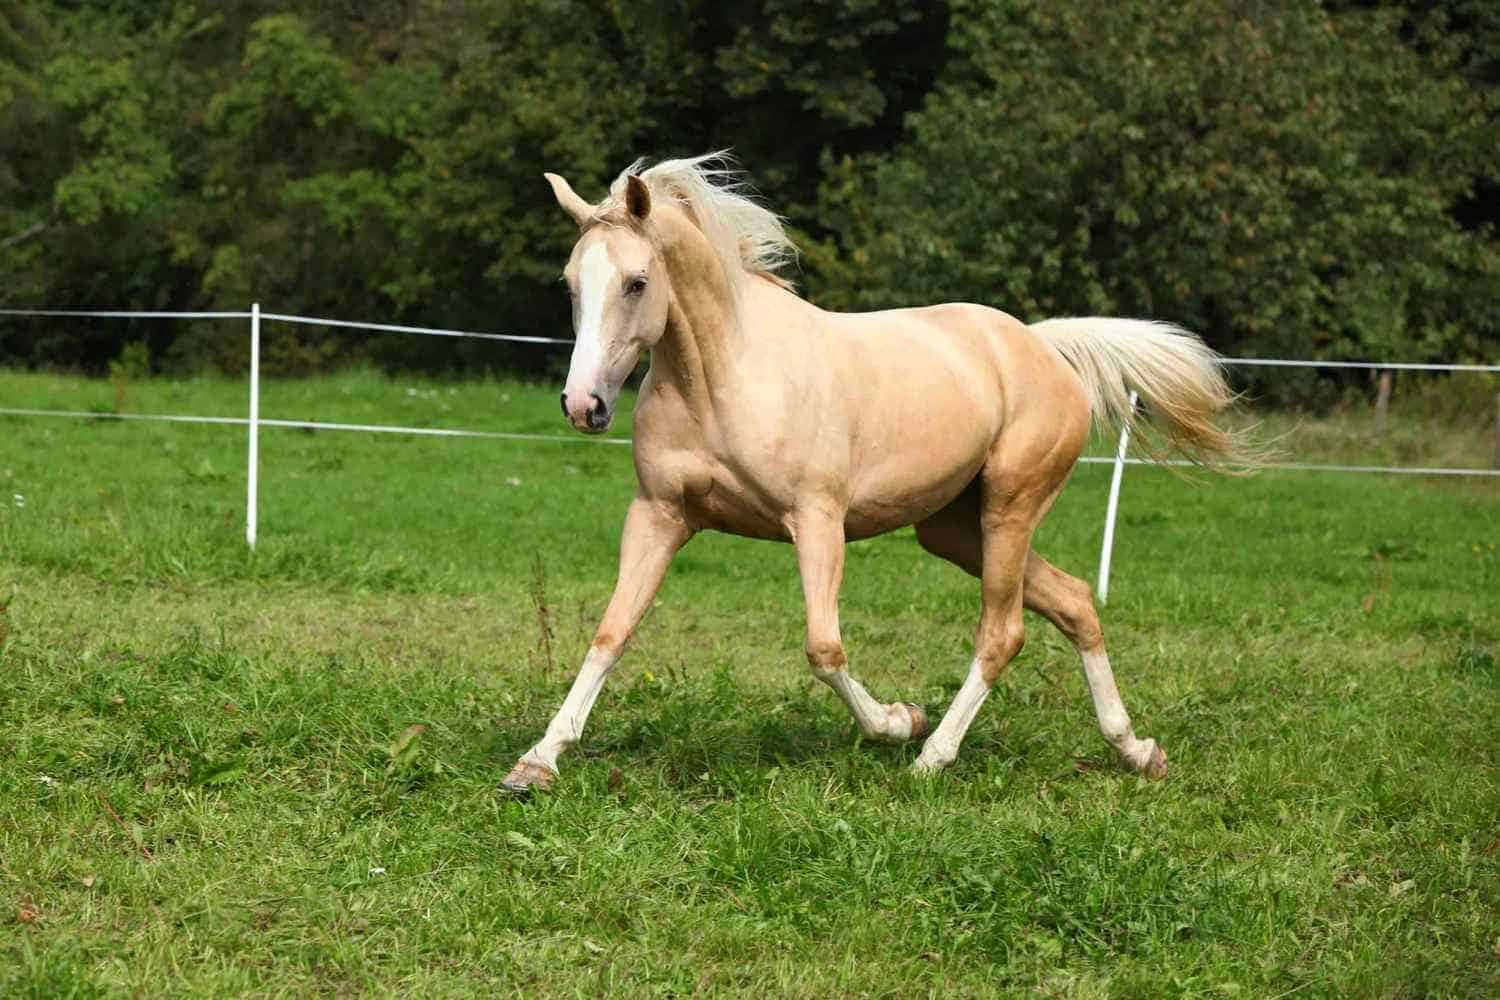 Caption: Majestic Palomino Horses Galloping on Meadow